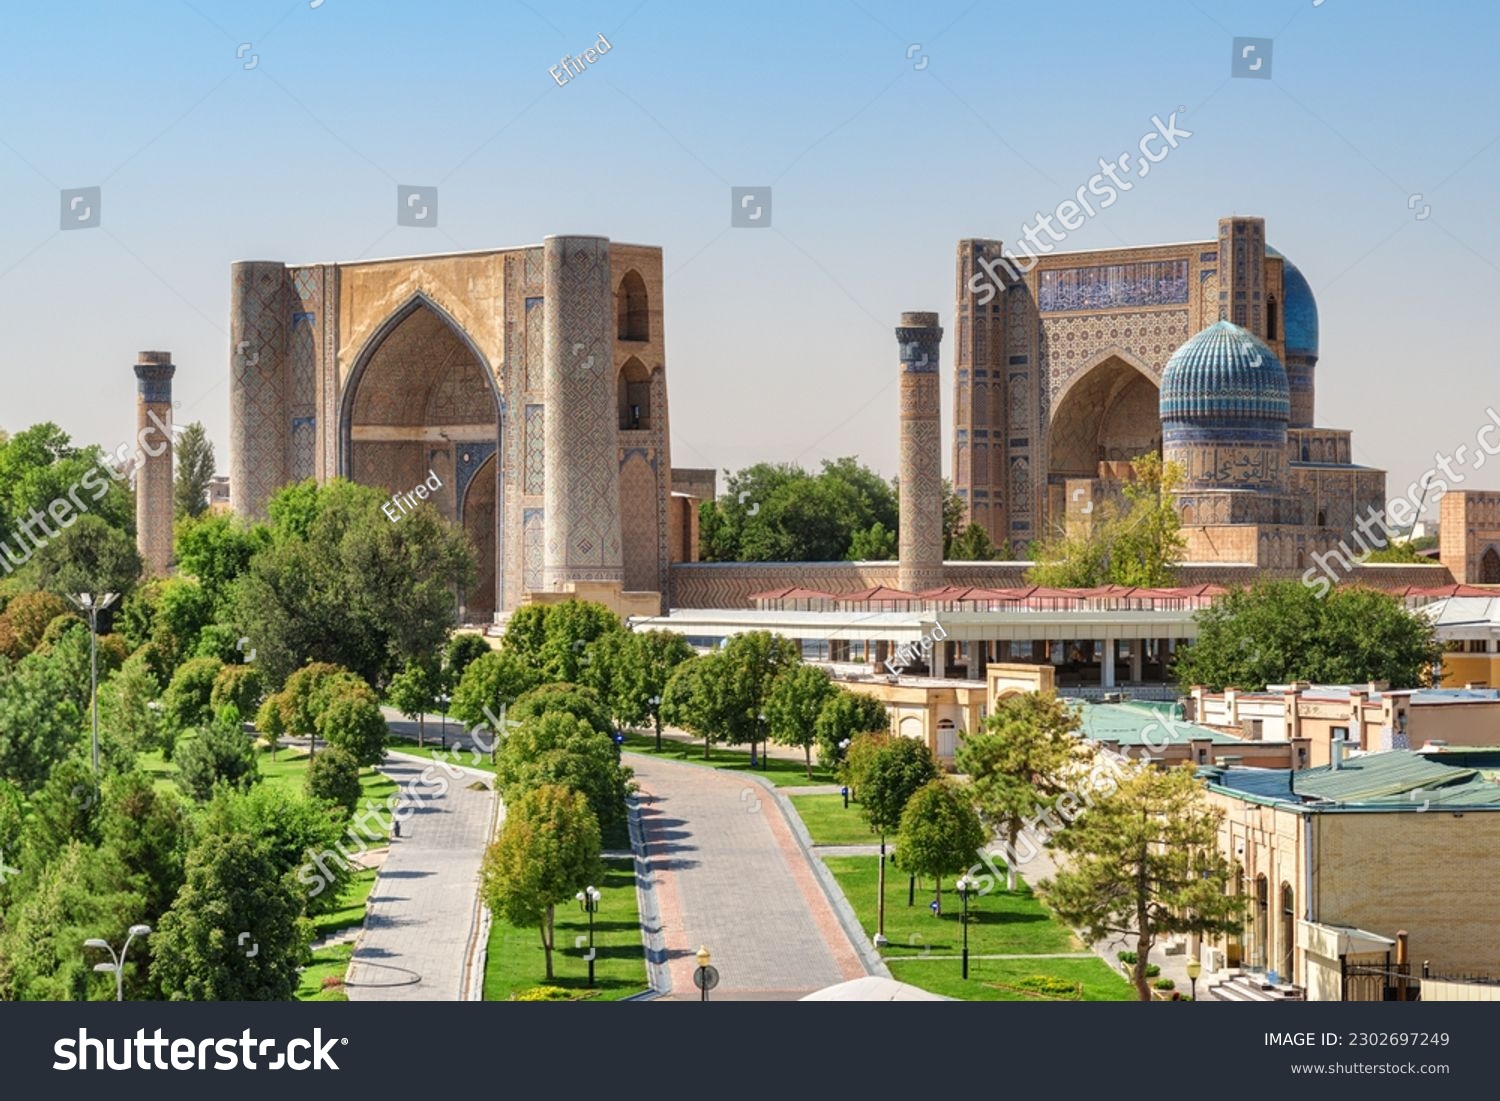 Awesome view of the Bibi-Khanym Mosque in Samarkand, Uzbekistan. The mosque is a popular tourist attraction of Central Asia. #2302697249